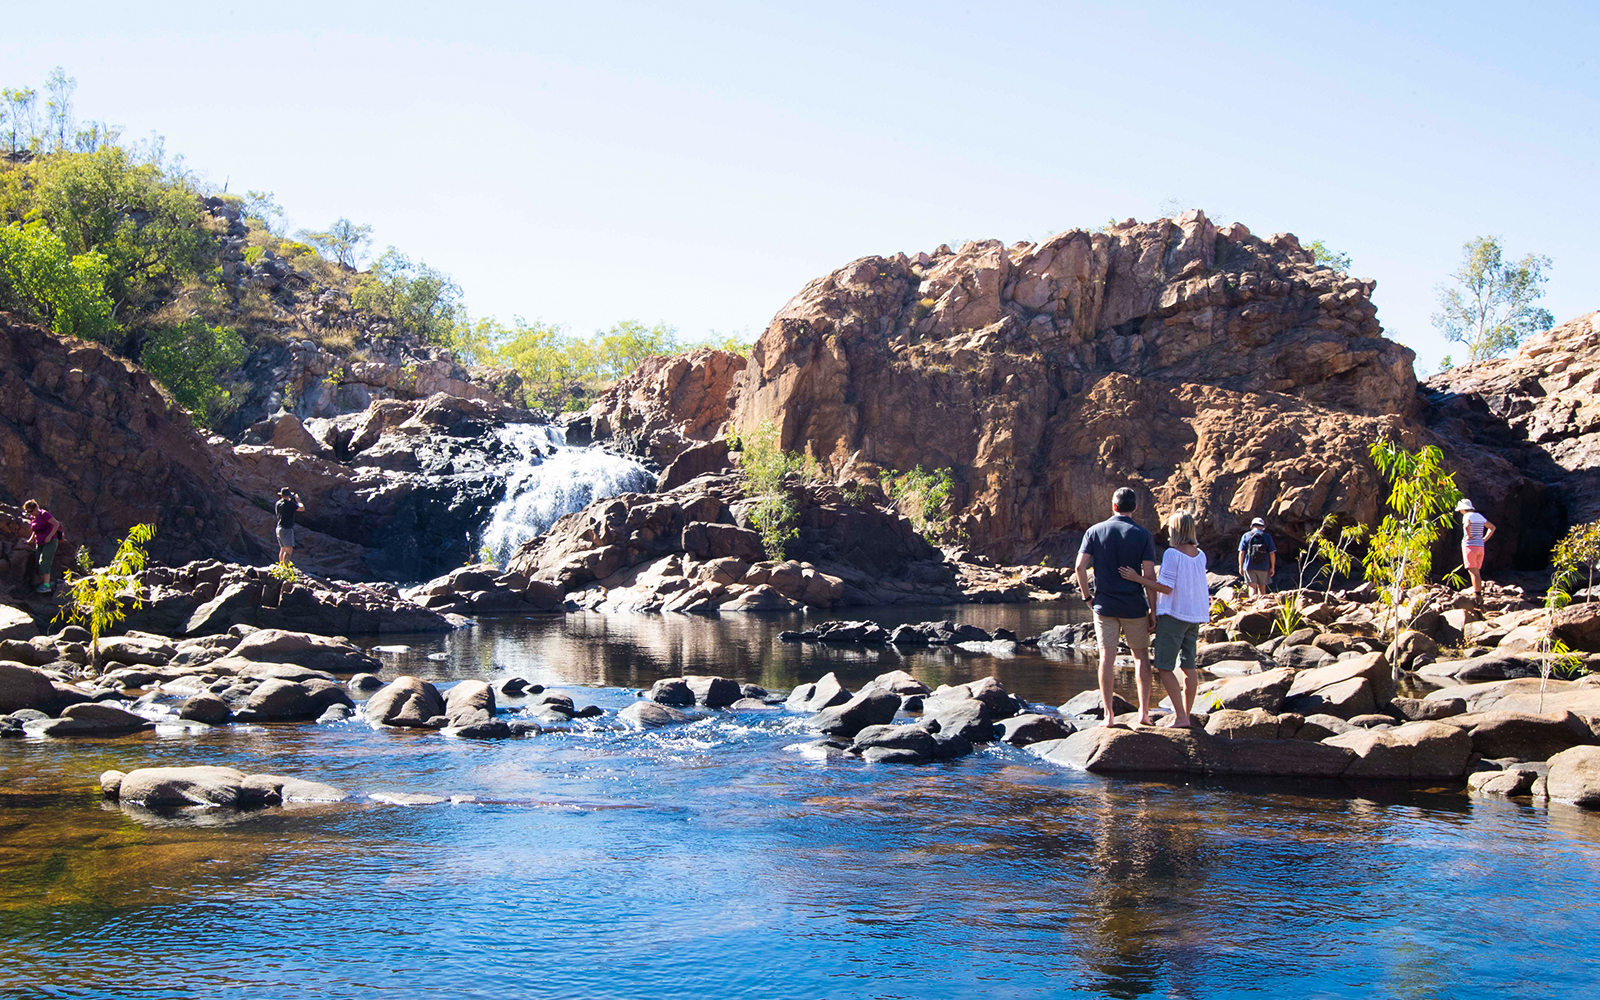 Image of Full-Day Guided Tour of Katherine Gorge & Edith Falls with Round-Trip Transfers